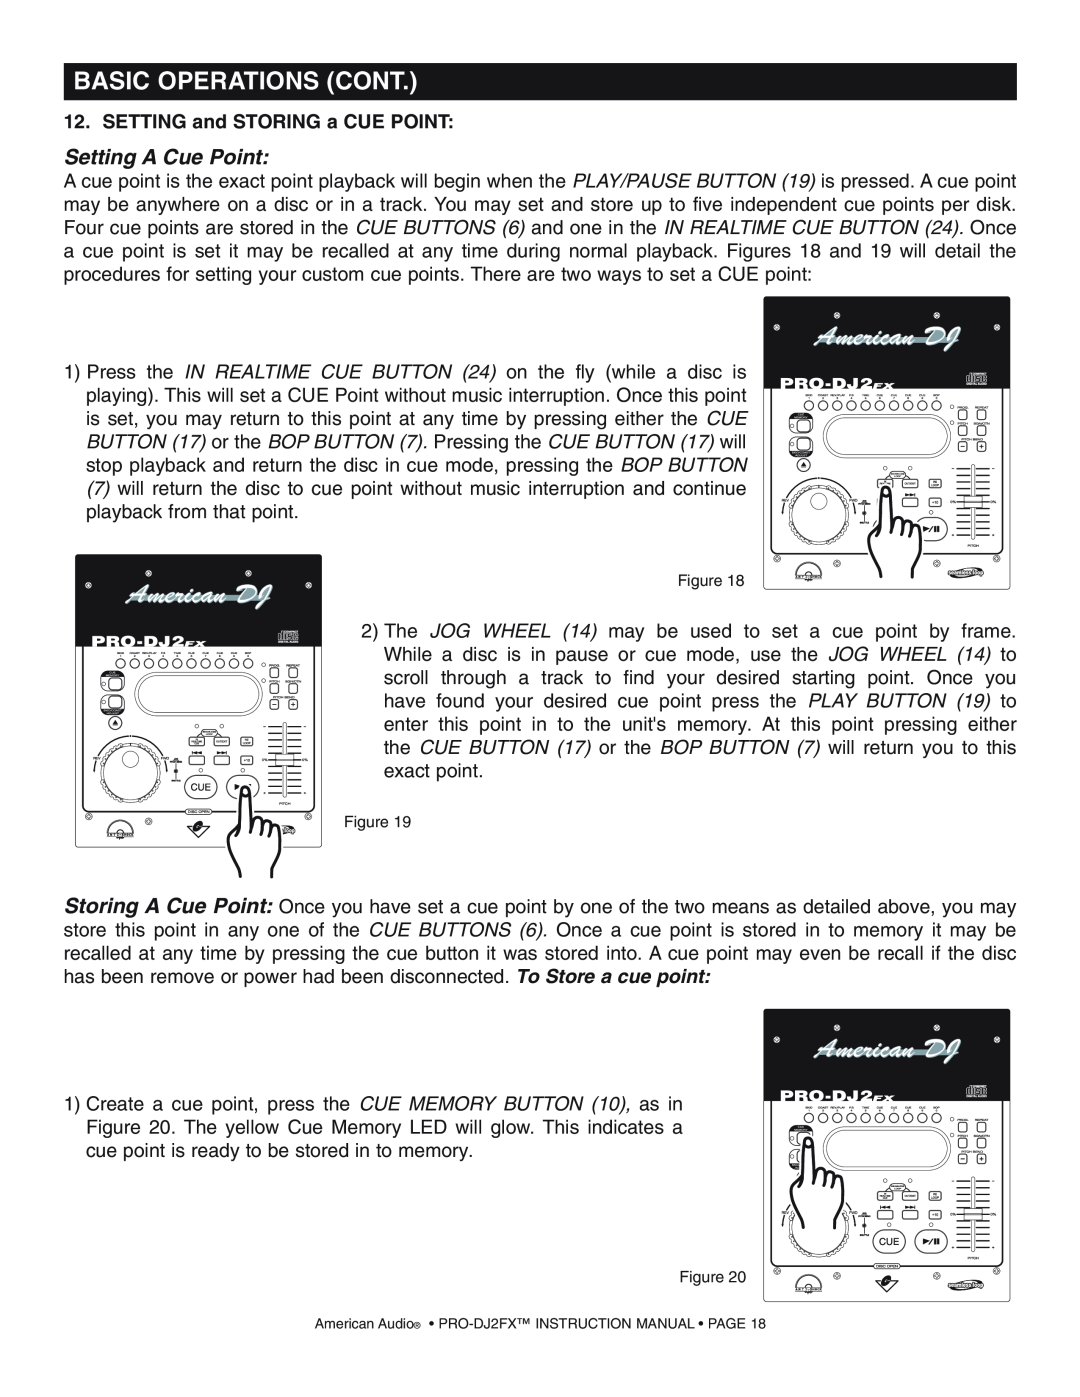 American Audio PRO-DJ2FX operating instructions Setting A Cue Point, Basic Operations Cont, SETTING and STORING a CUE POINT 